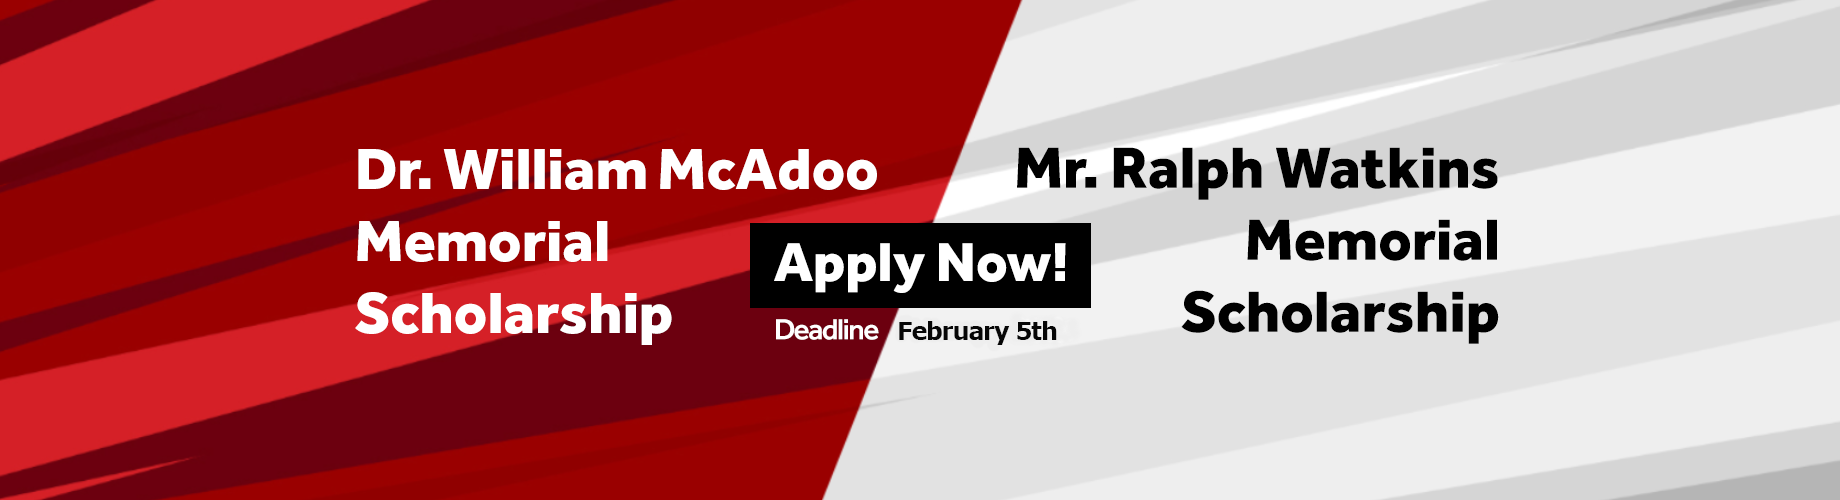 Banner Dr. William McAdoo Memorial Scholarship and Mr. Ralph Wakins Memorial Scholarship Apply Now! Deadline February 3